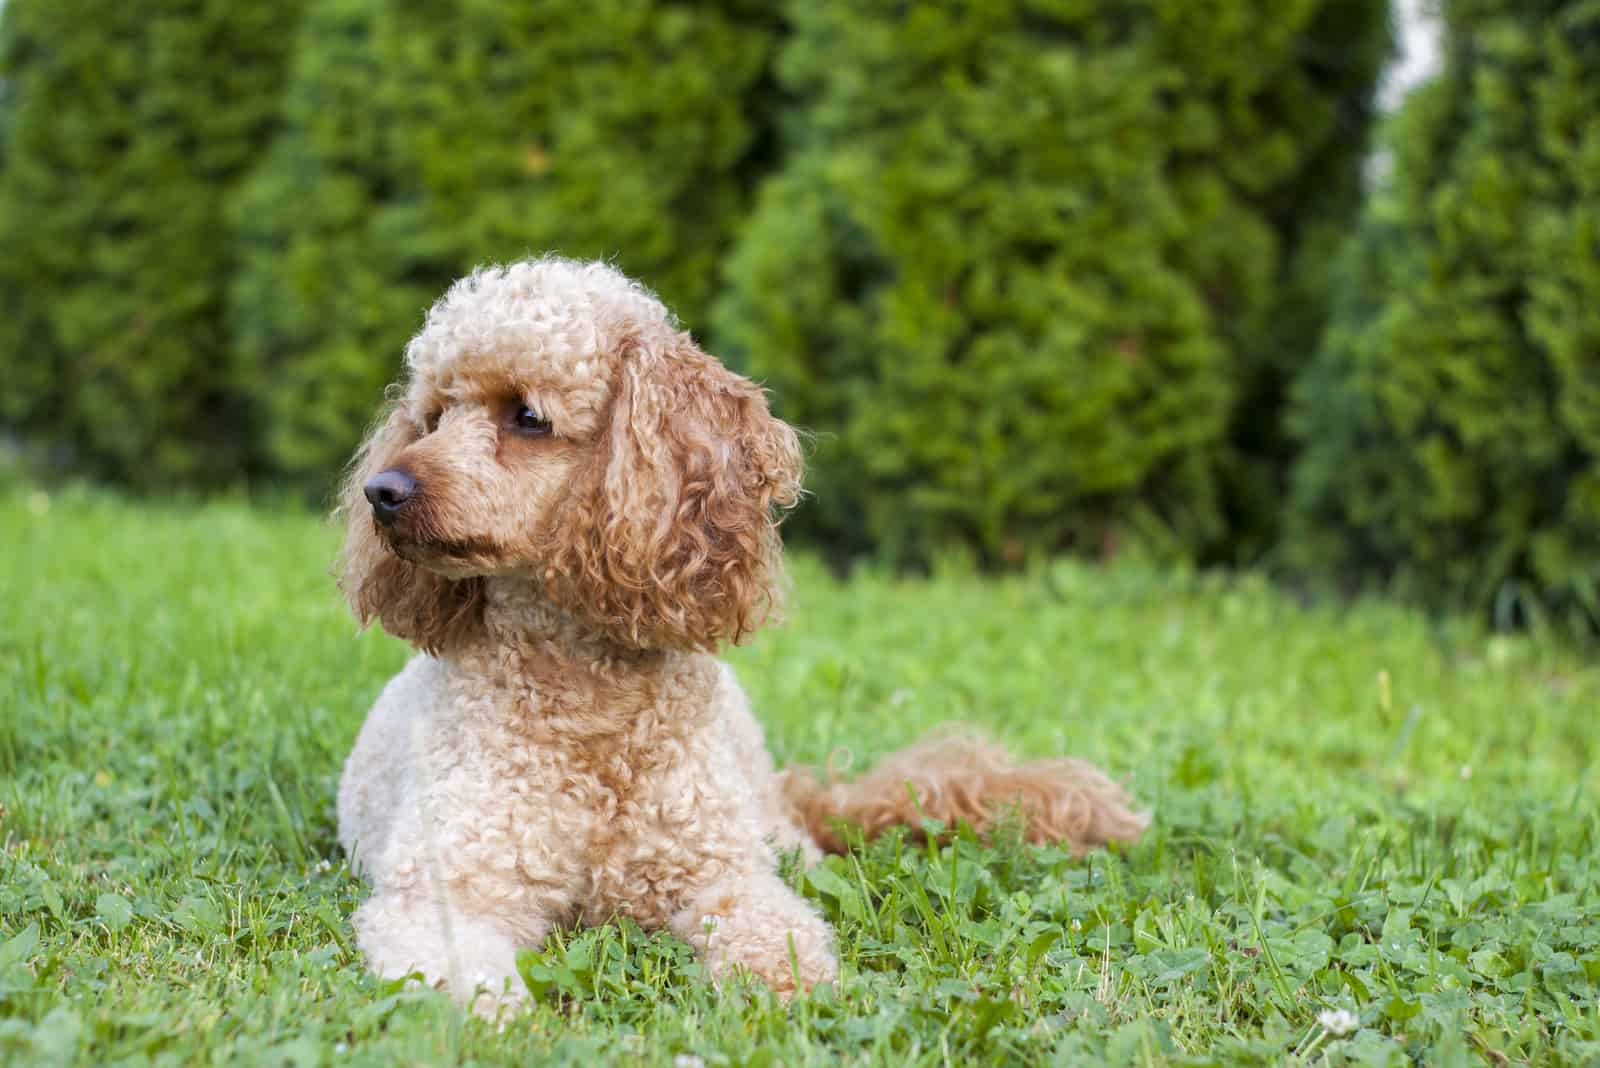 apricot poodle lies in the grass